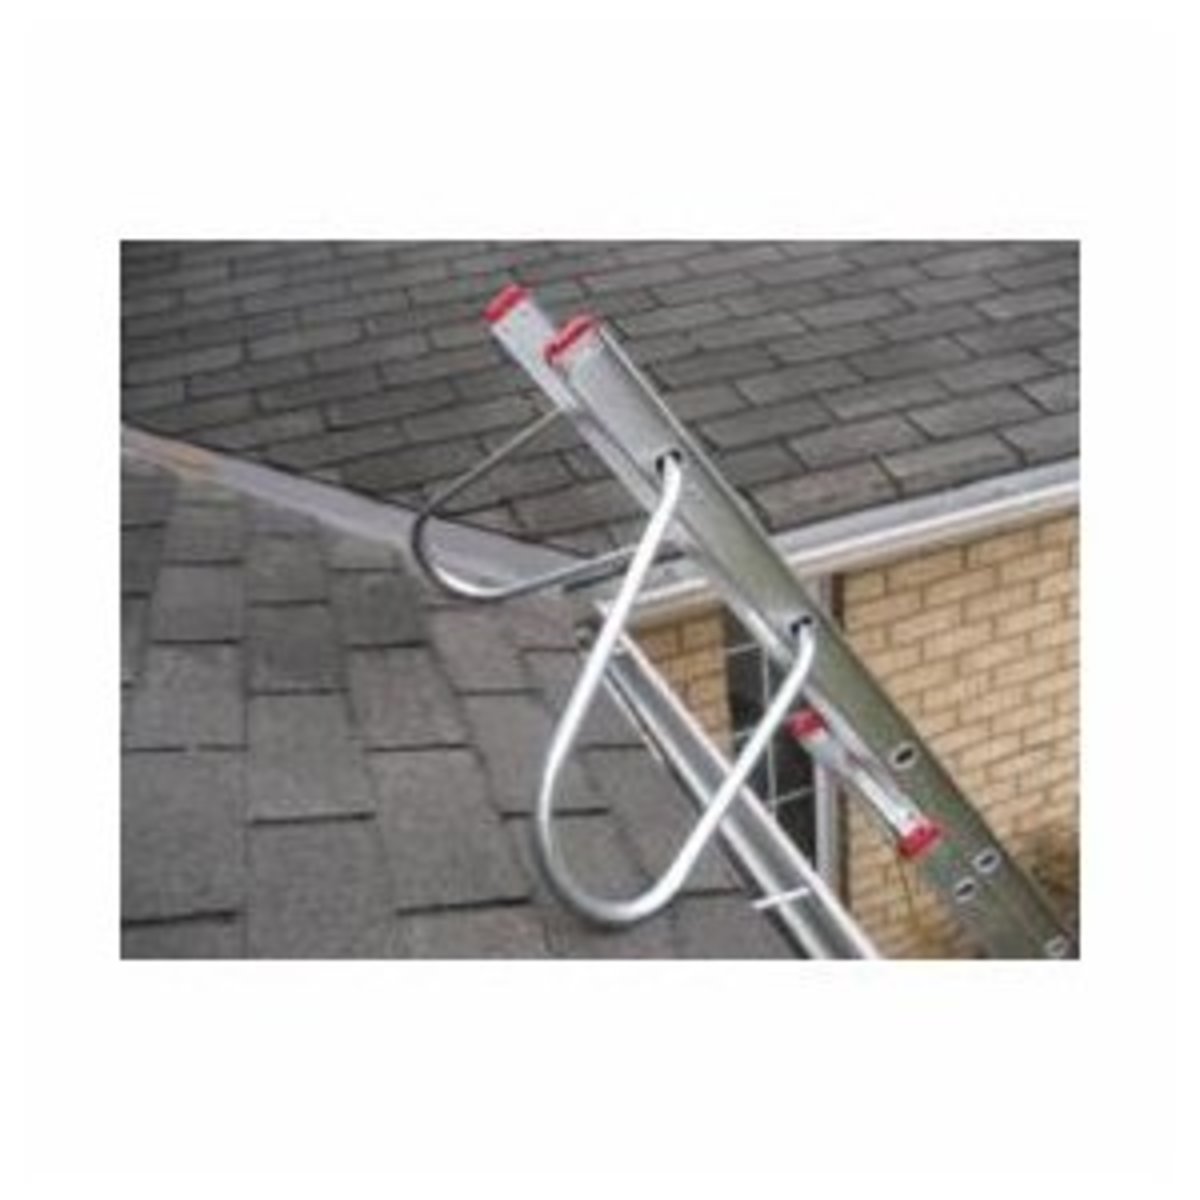 Ladder "arms," or stabilizers should safely clear the gutter.